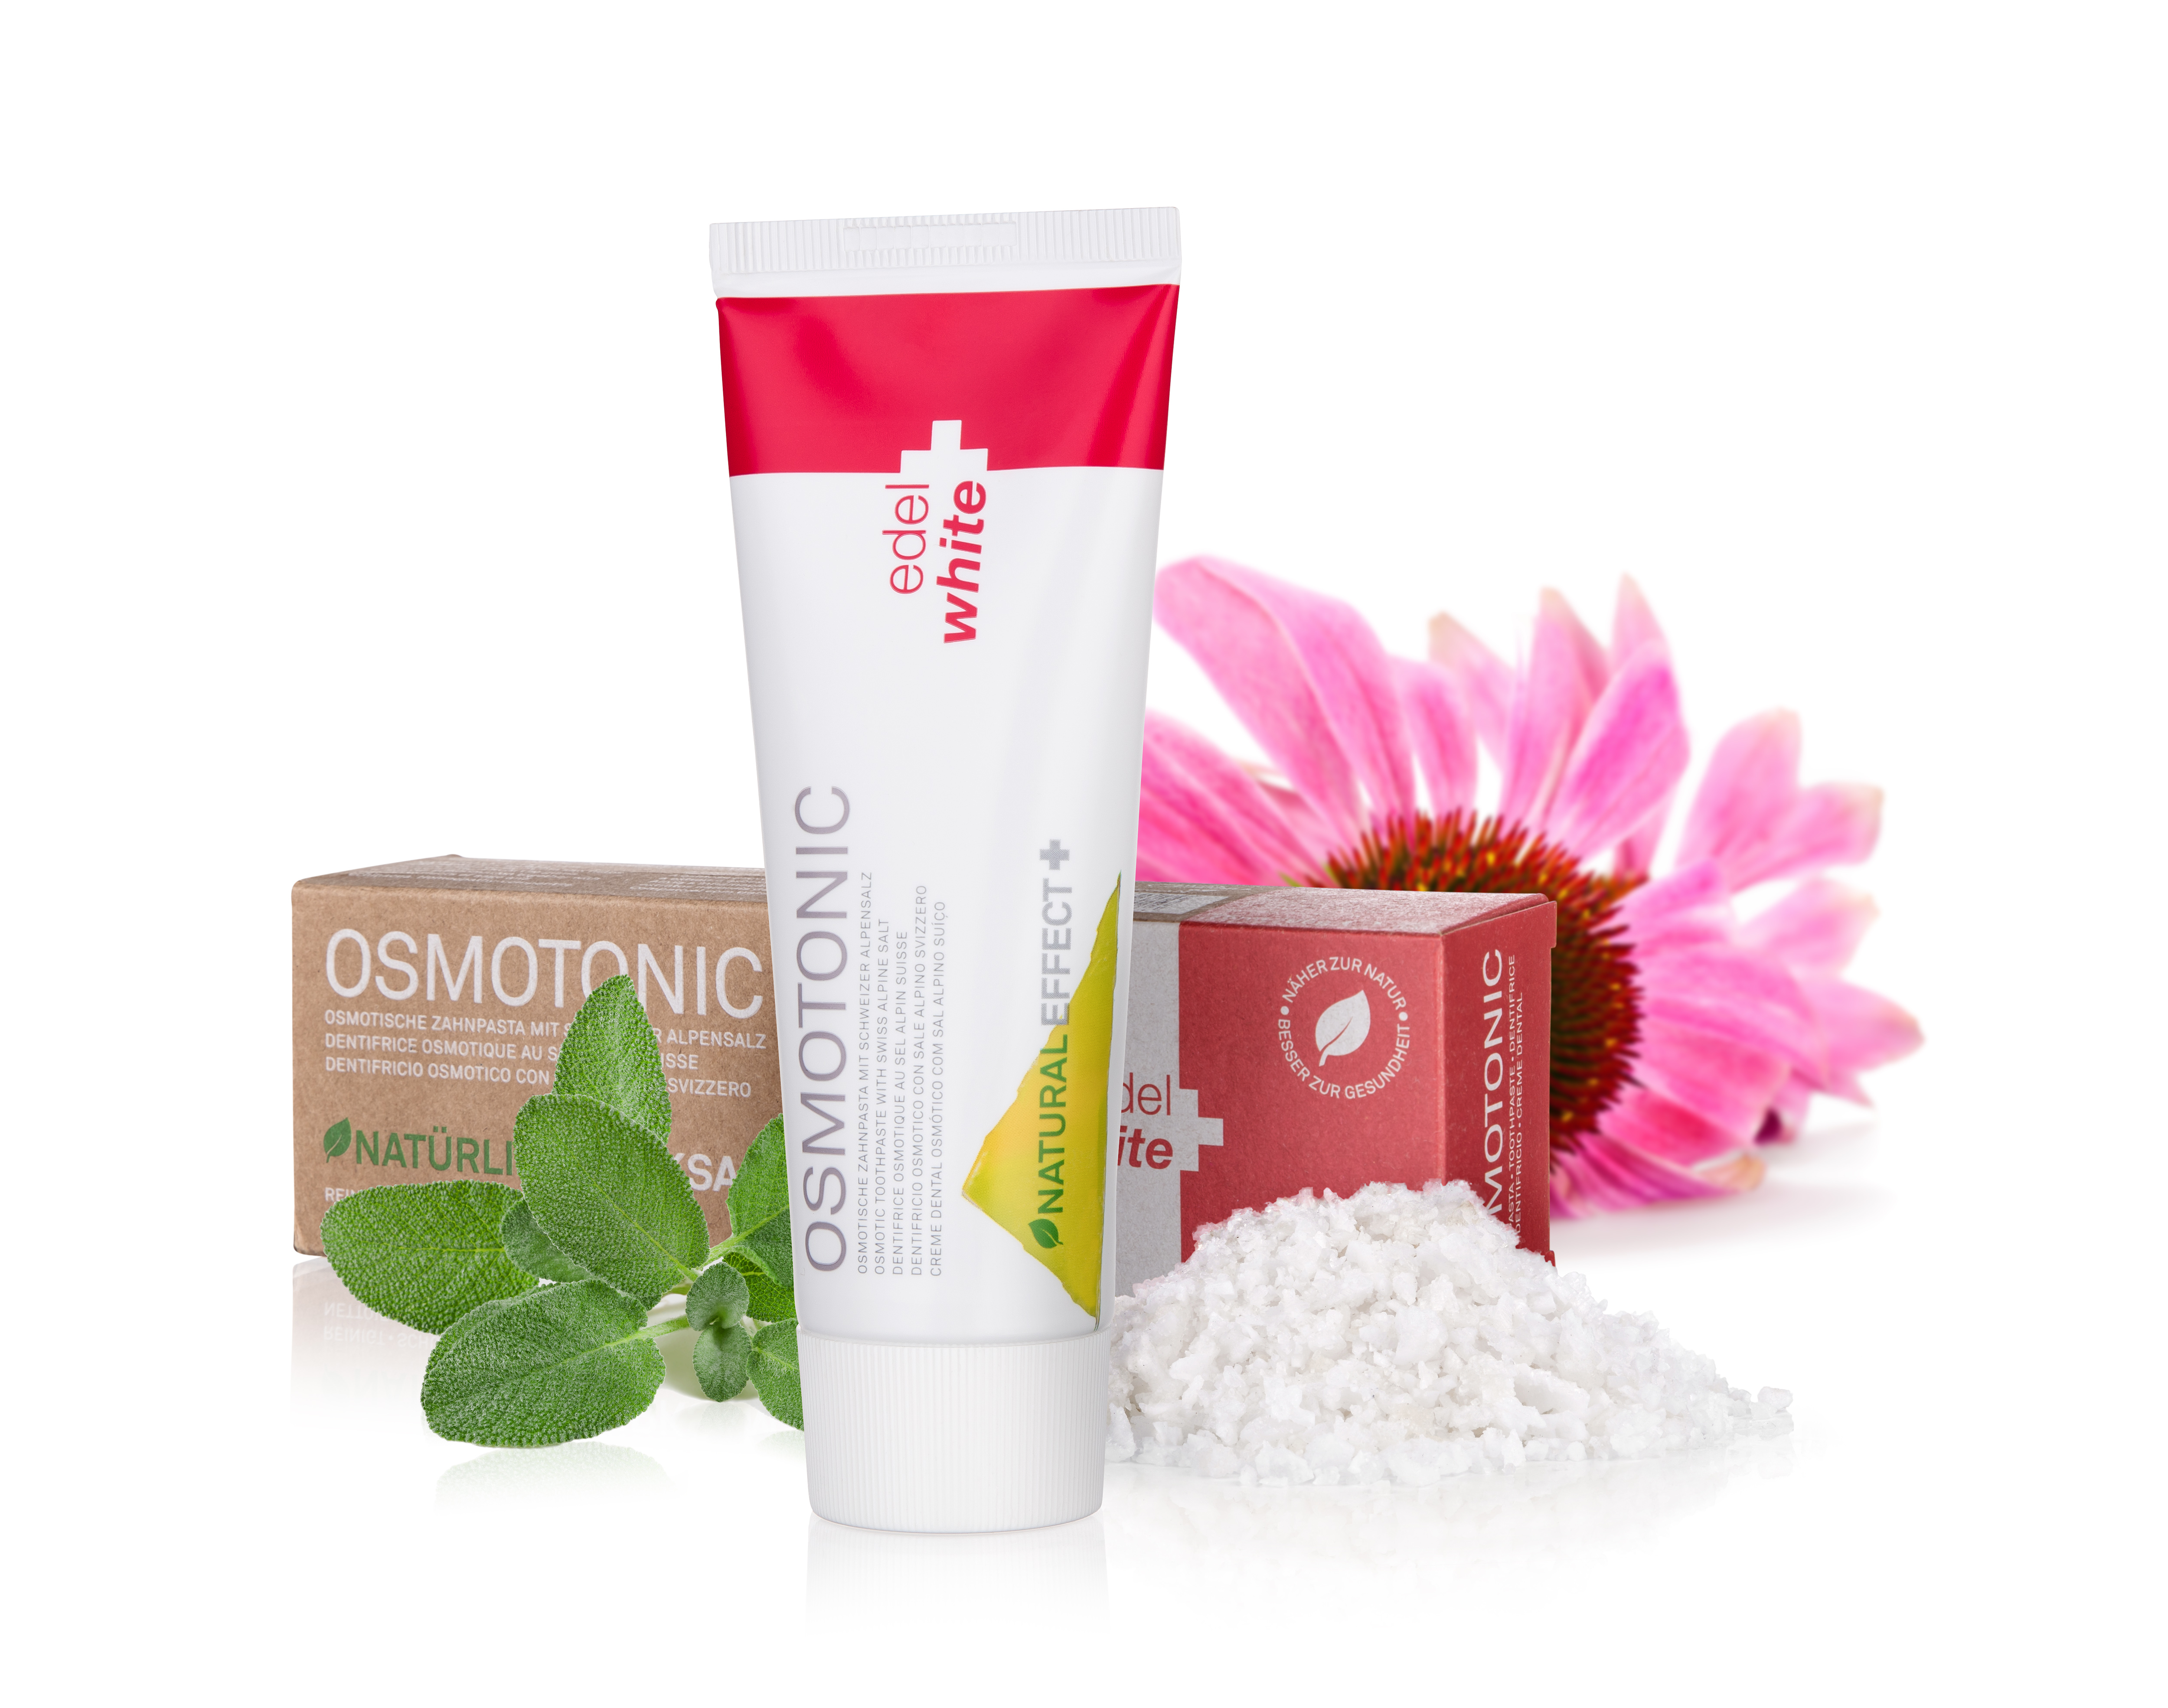 Osmotonic toothpaste with natural extracts of sage and echinacea